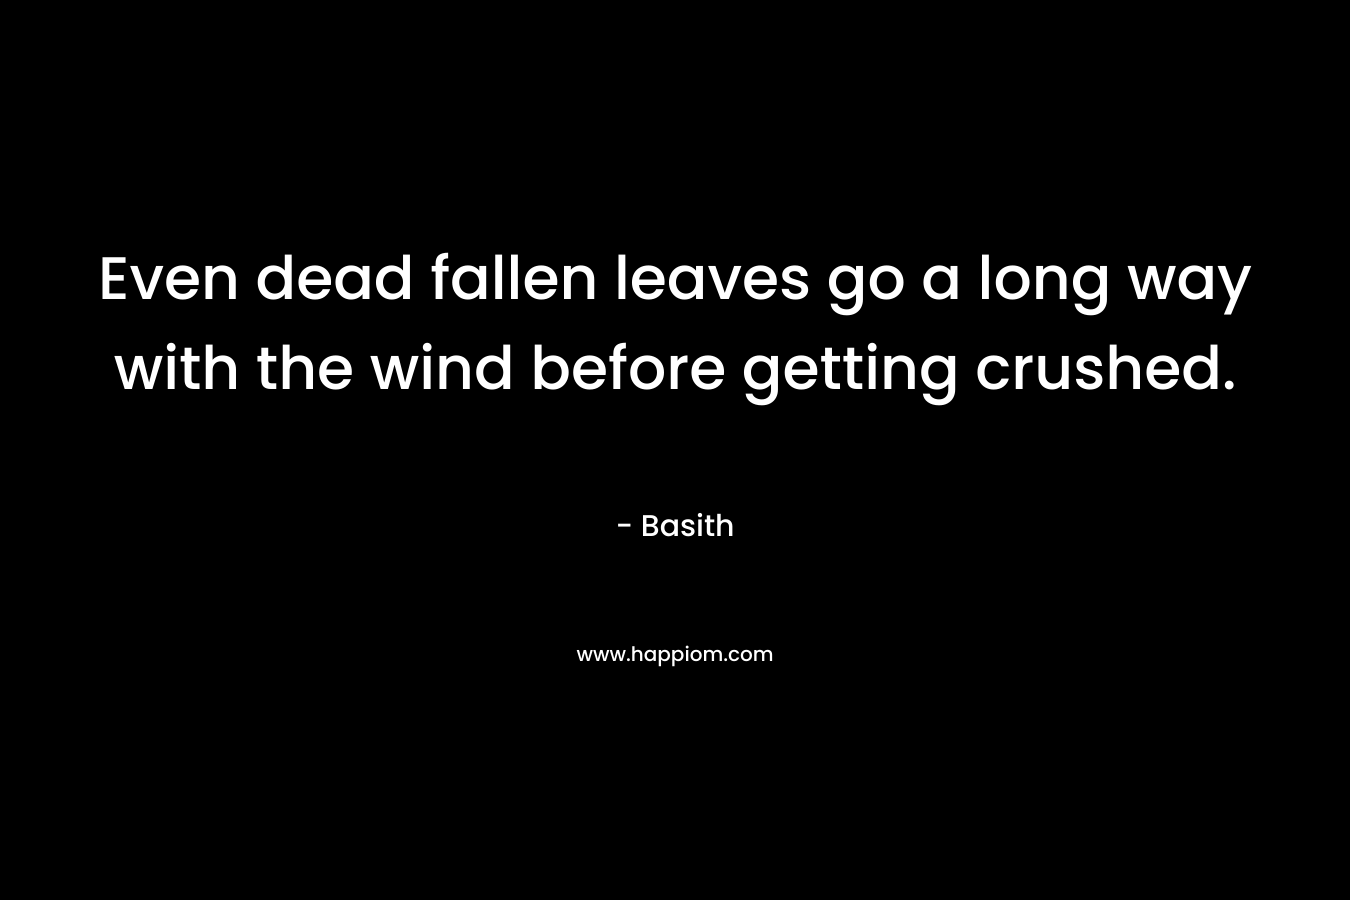 Even dead fallen leaves go a long way with the wind before getting crushed.